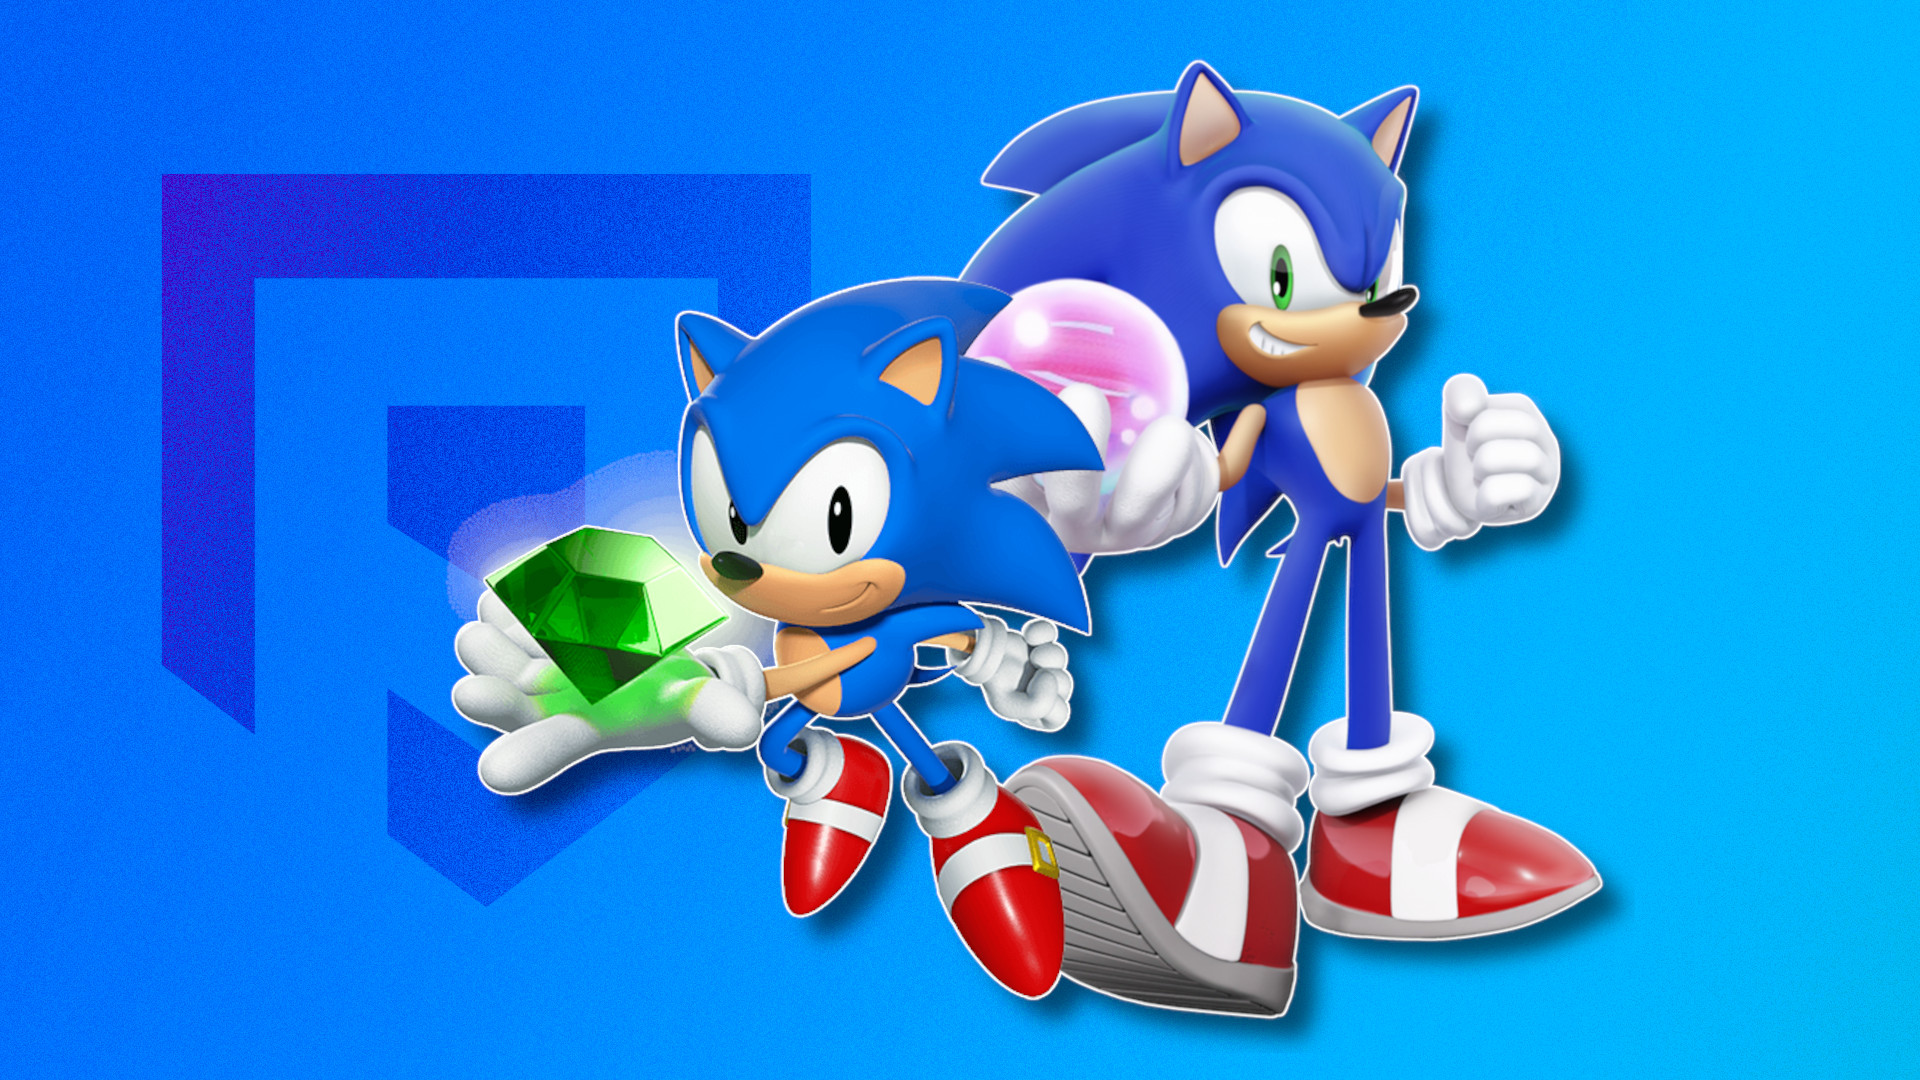 Can 'Sonic the Hedgehog' Possibly Be Good?